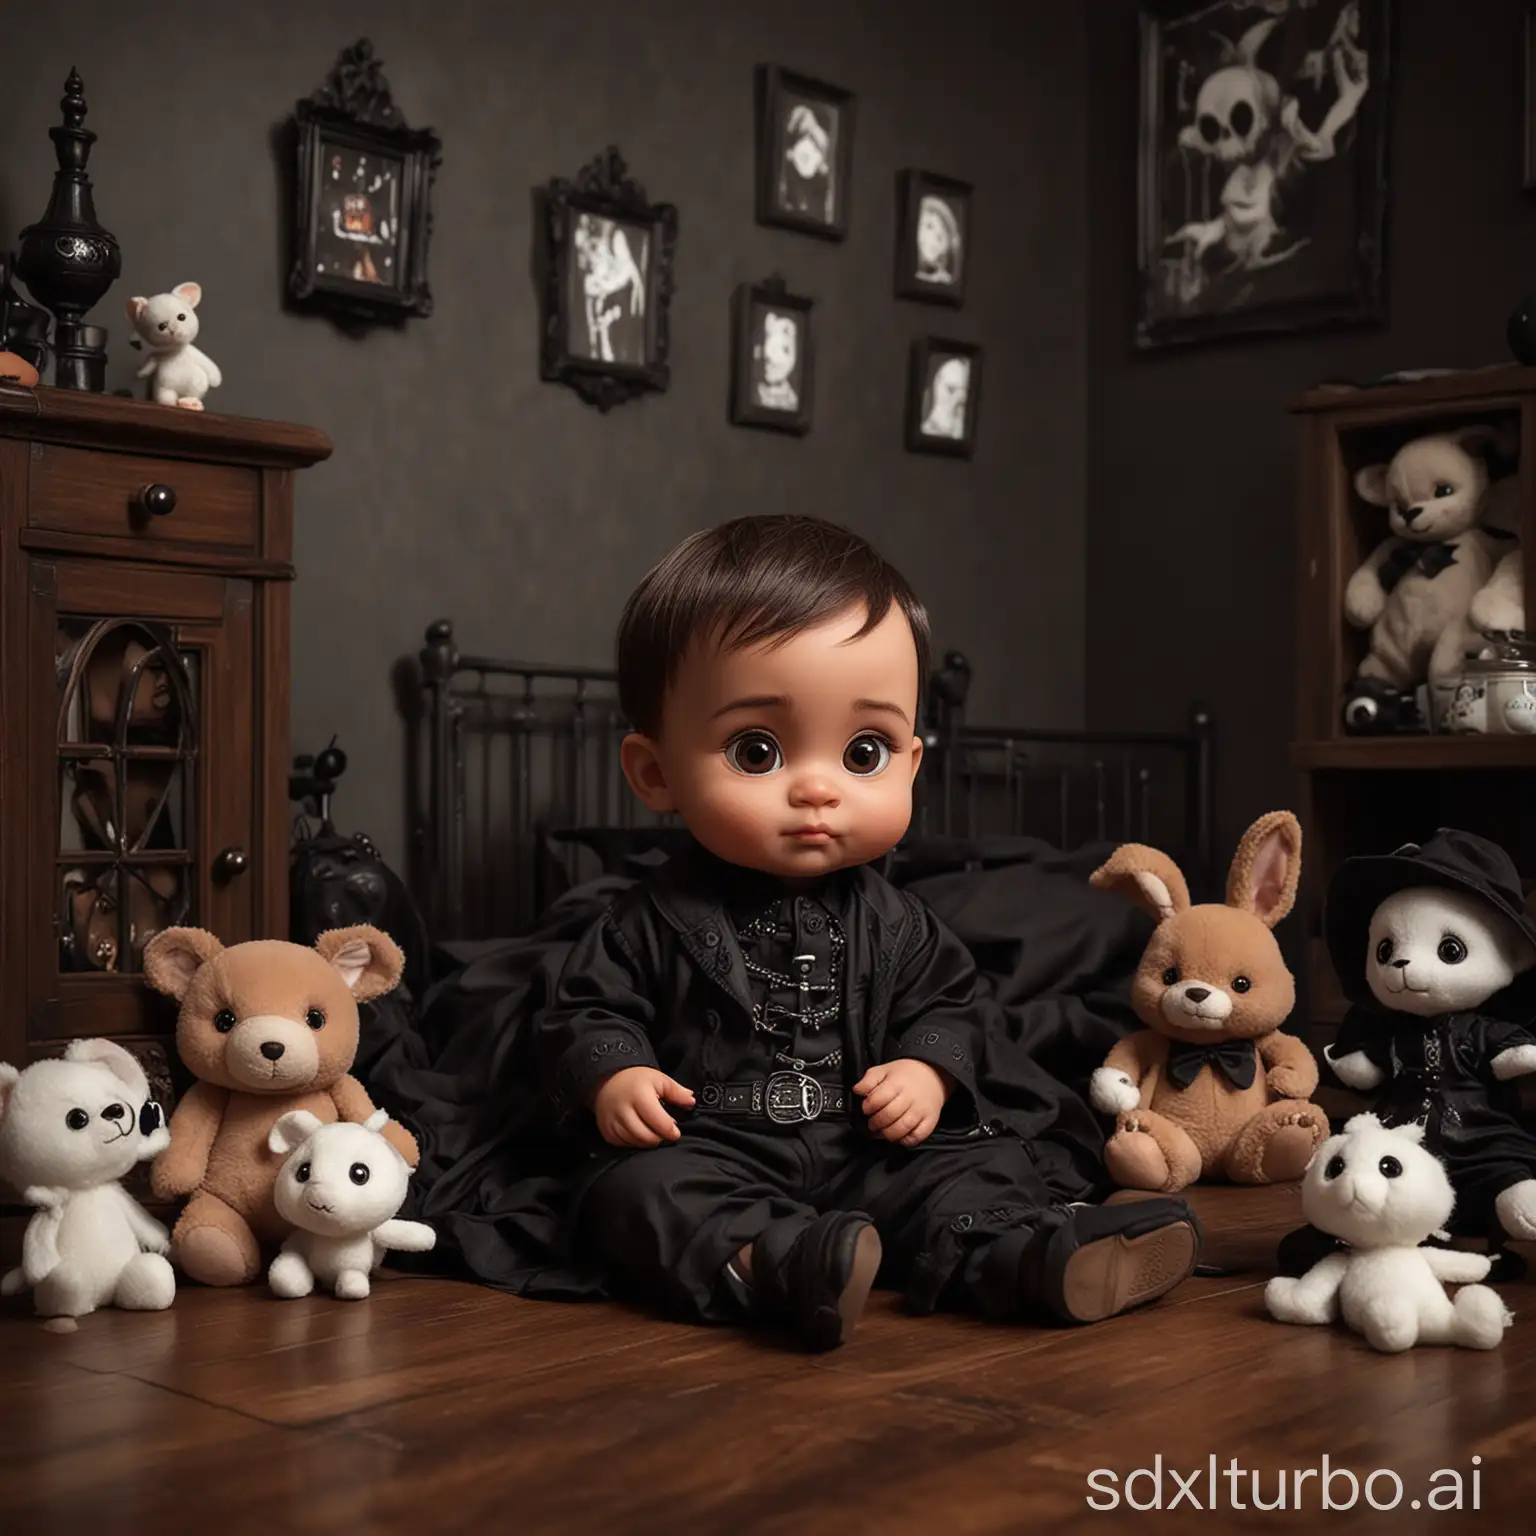 Adorable-Gothic-Baby-Boy-Playing-in-Darkly-Decorated-Room